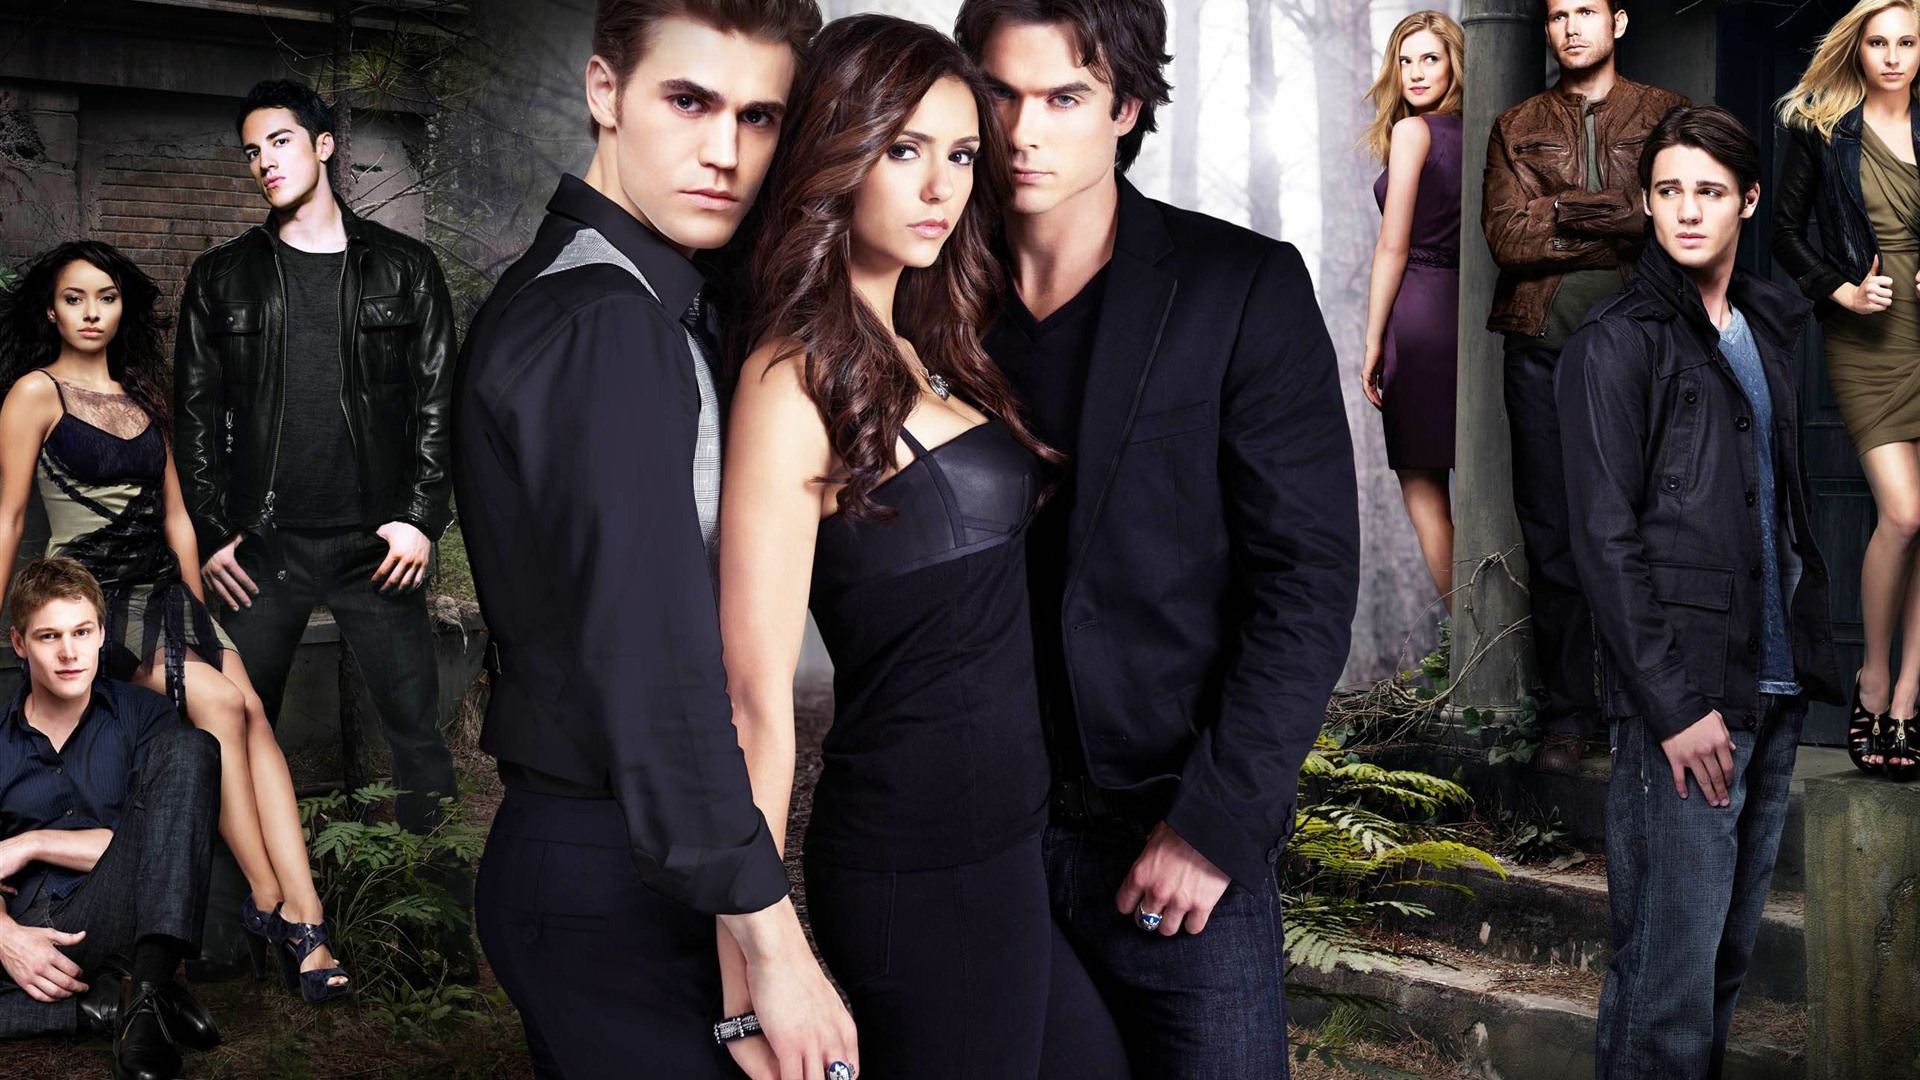 The Vampire Diaries HD Wallpapers #12 - 1920x1080